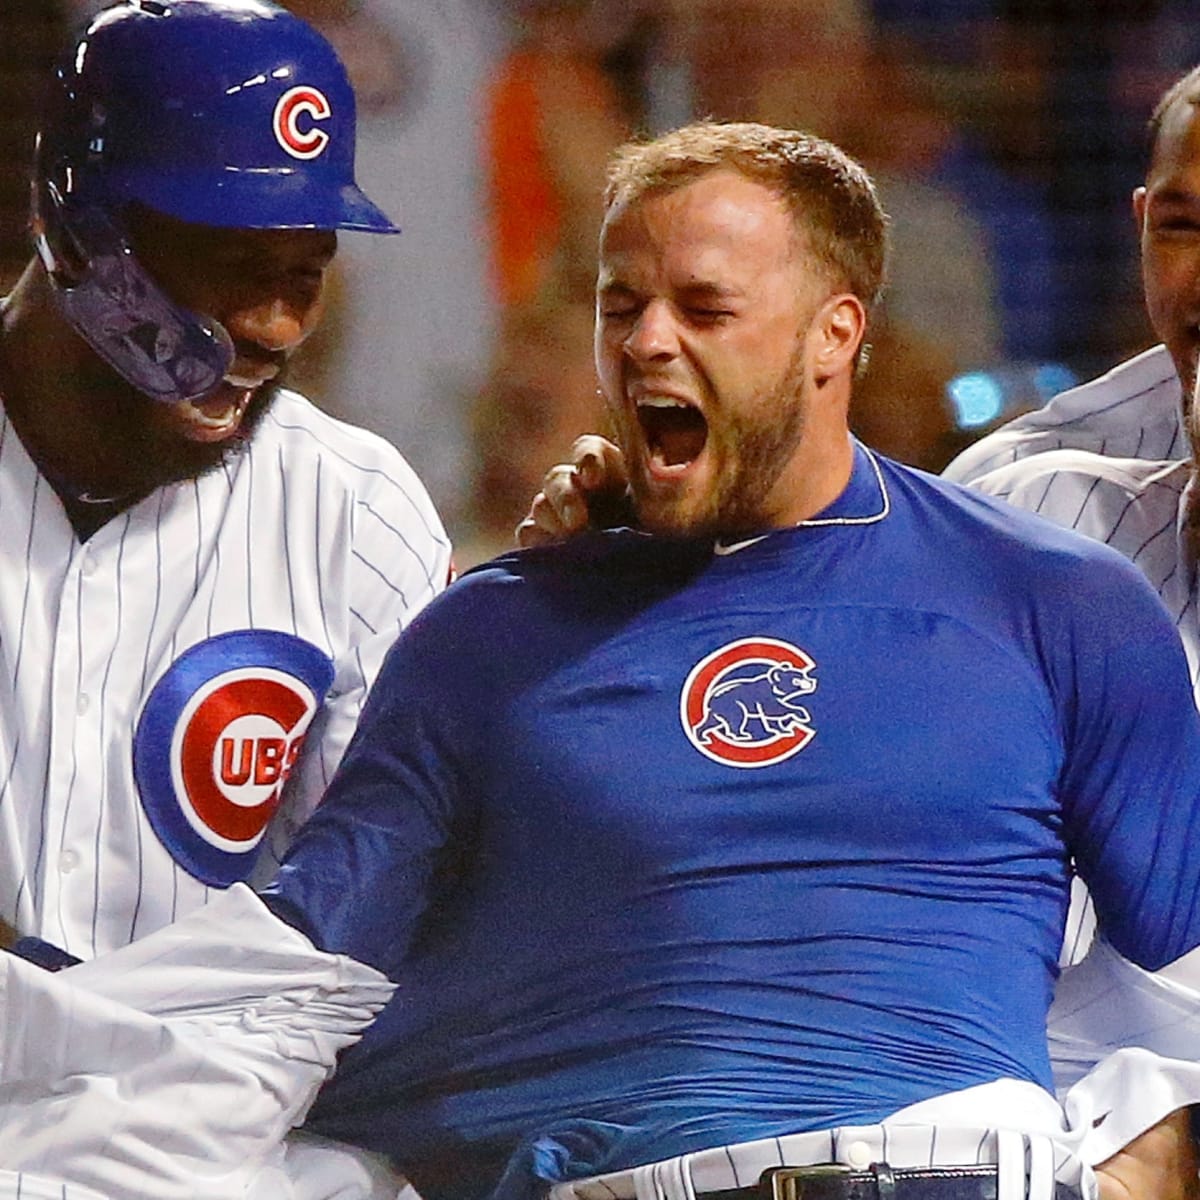 Cubs' David Bote's walk off grand slam call over Nationals (Audio) - Sports  Illustrated